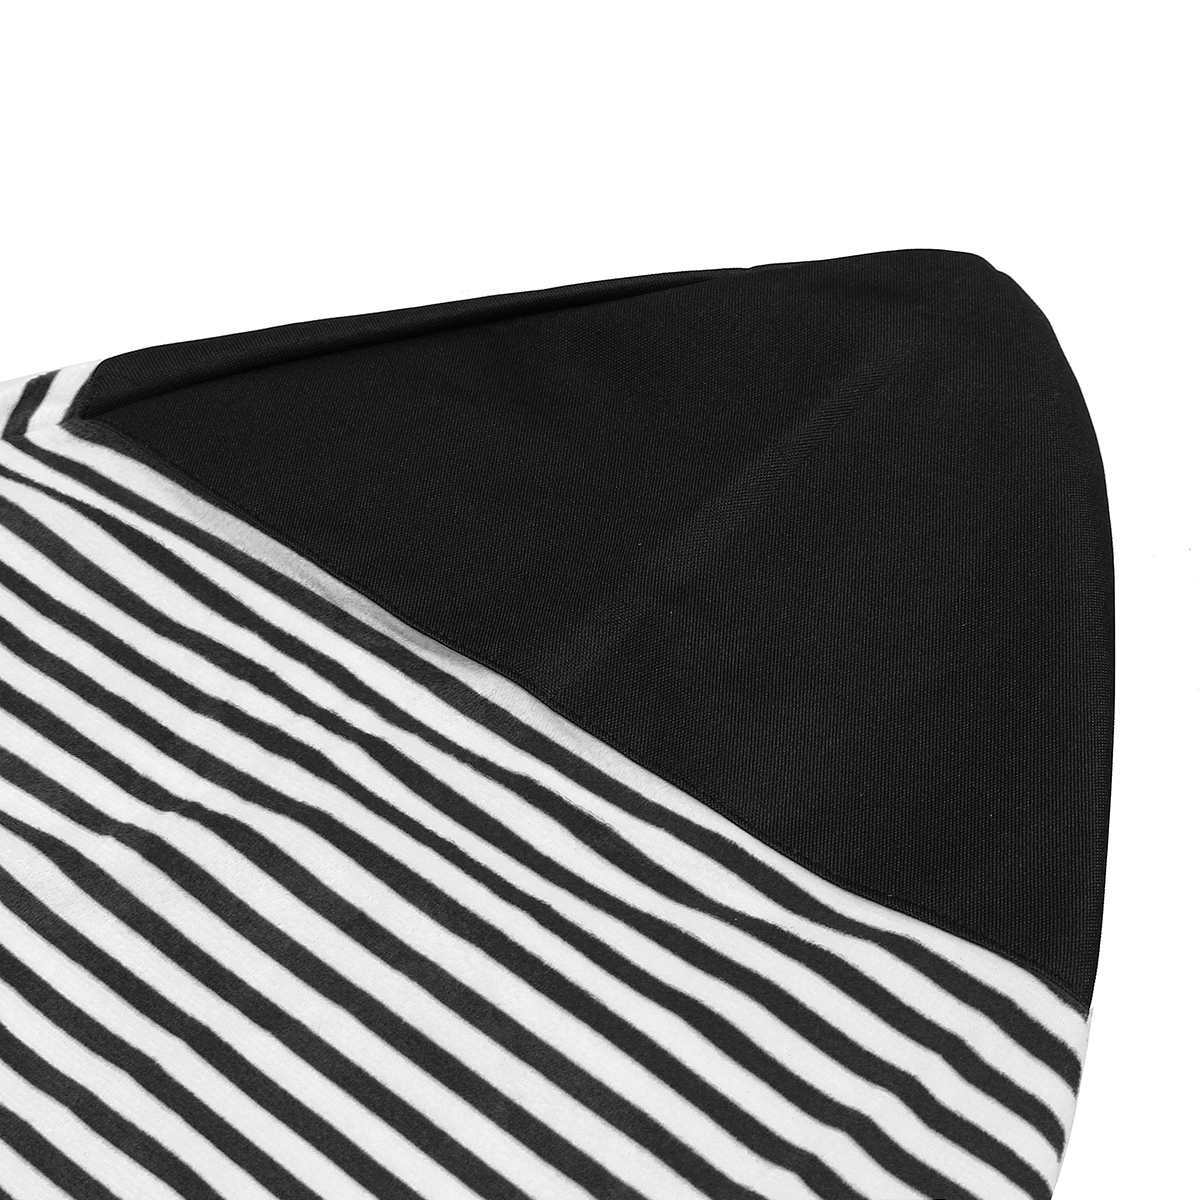 IWO Striped Surfboard Snowboard Protective Cover